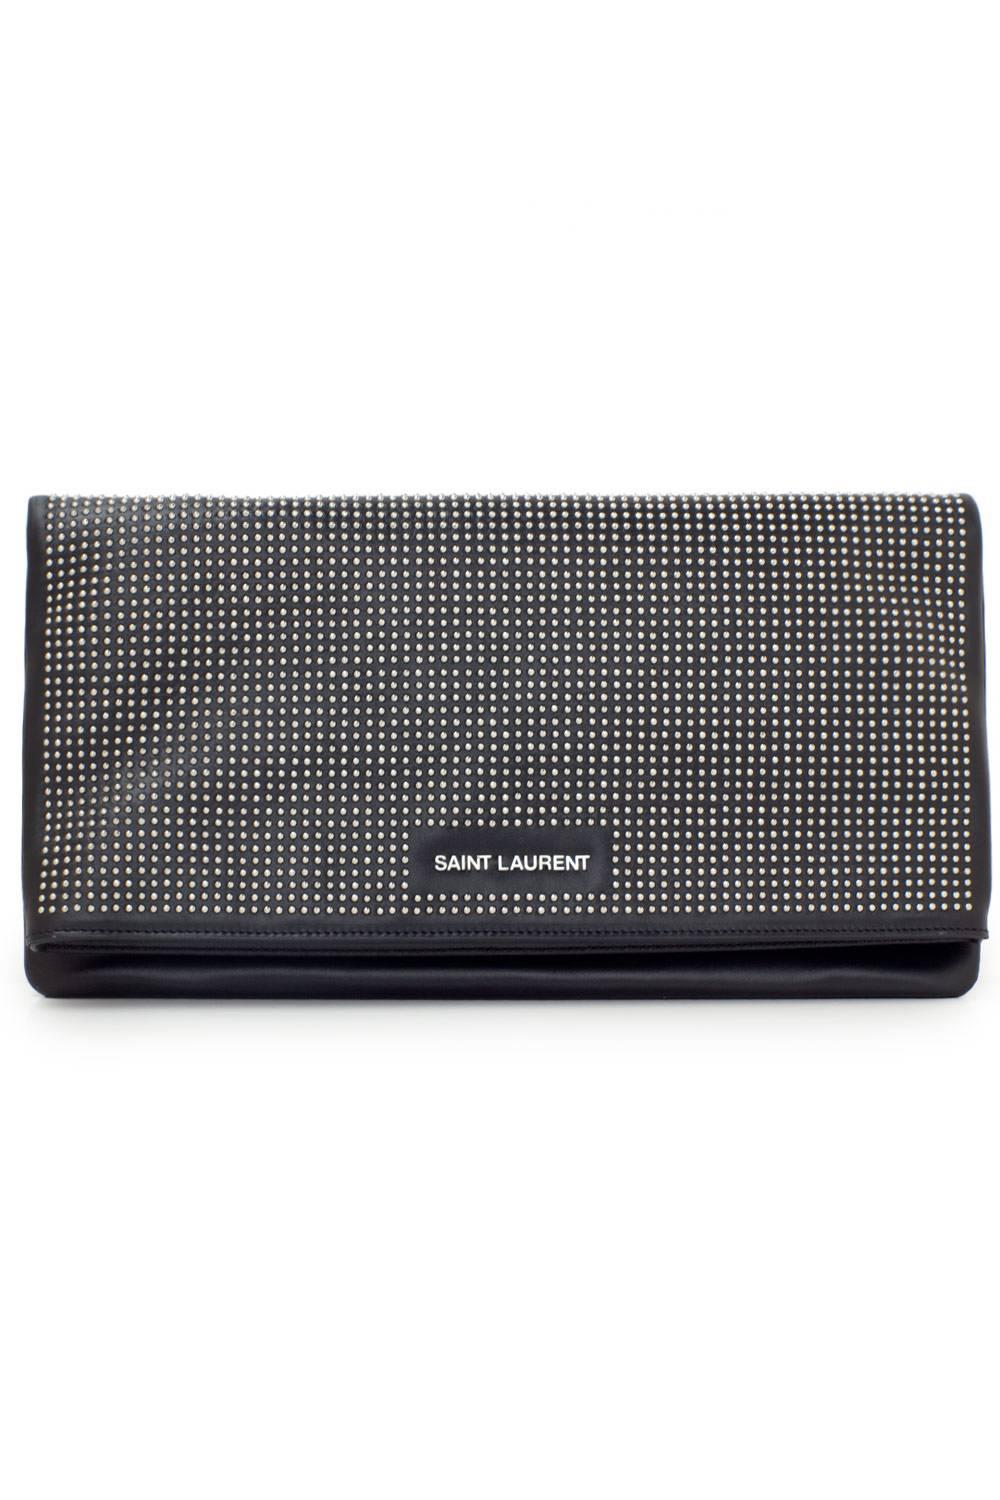 Saint Laurent Black Studded Letters Fold Over Clutch Bag.  Fine silver studded exterior.  Excellent clean condition - unused.  Includes care cards and duster. Measures 12 x 6.75 x 2.5".

We ship worldwide.